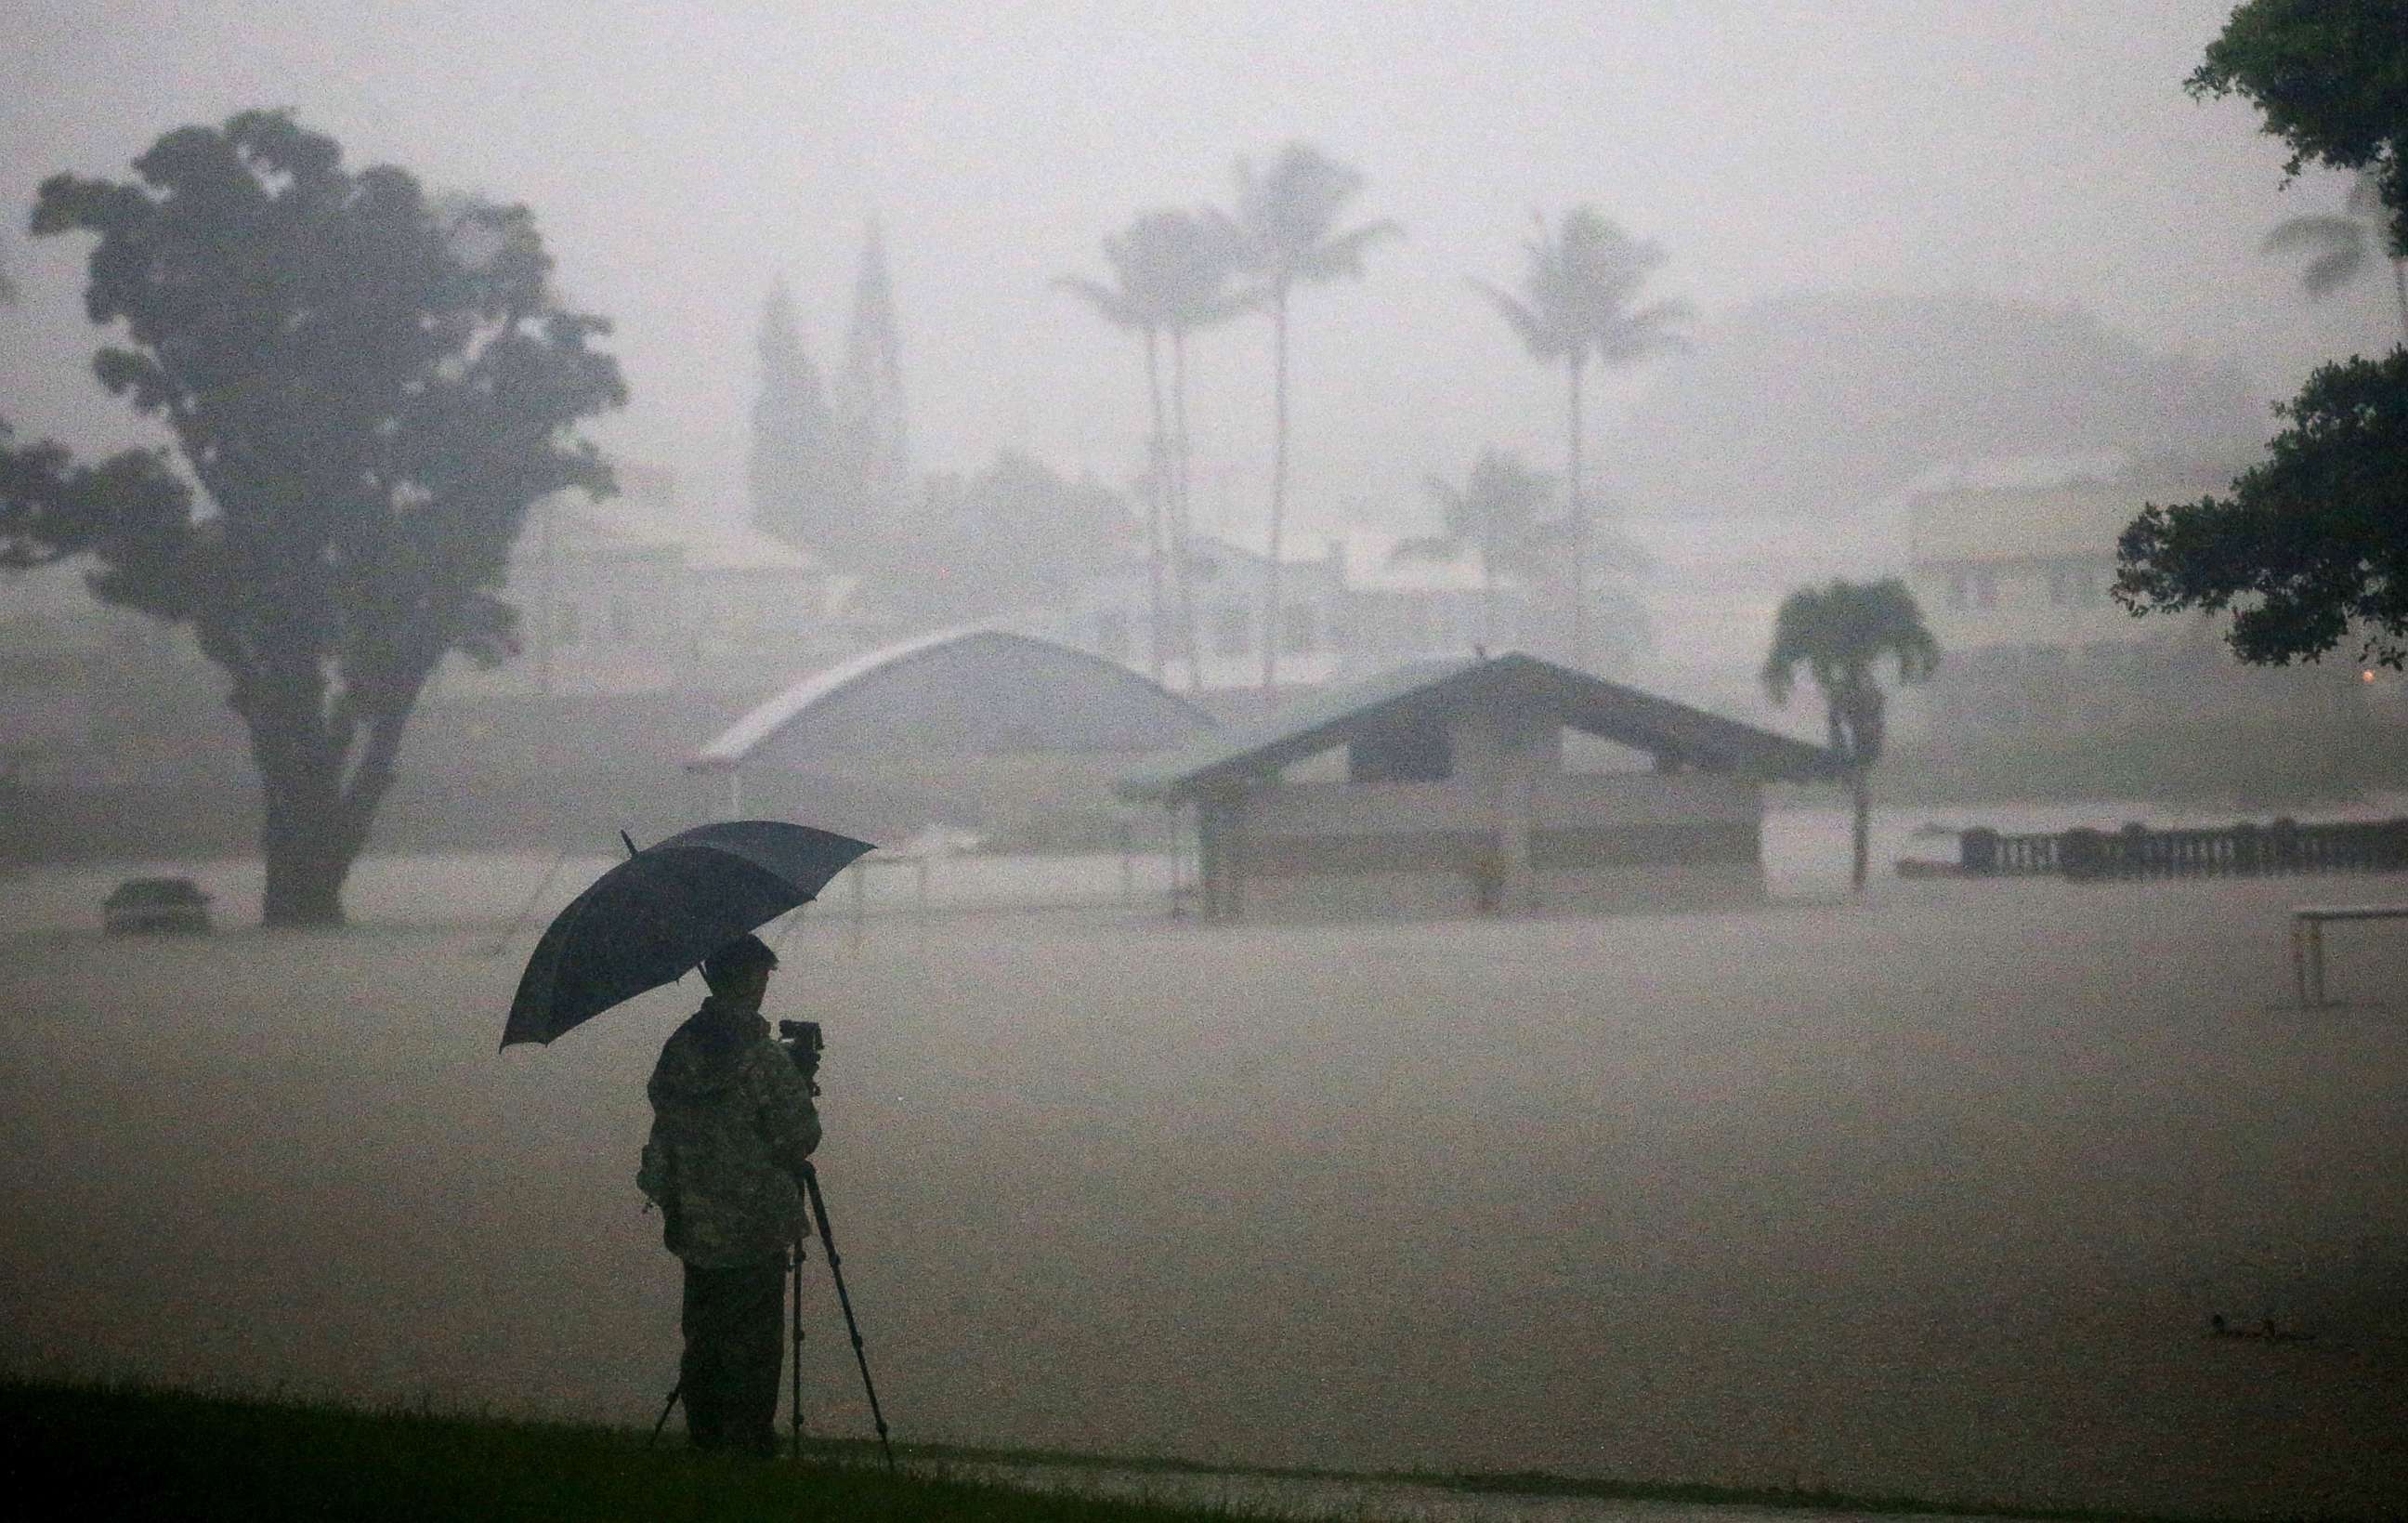 PHOTO: A man takes photos of floodwaters from Hurricane Lane rainfall on the Big Island, Aug. 23, 2018, in Hilo, Hawaii. Hurricane Lane has brought more than a foot of rain to some parts of the Big Island which is under a flash flood warning. 